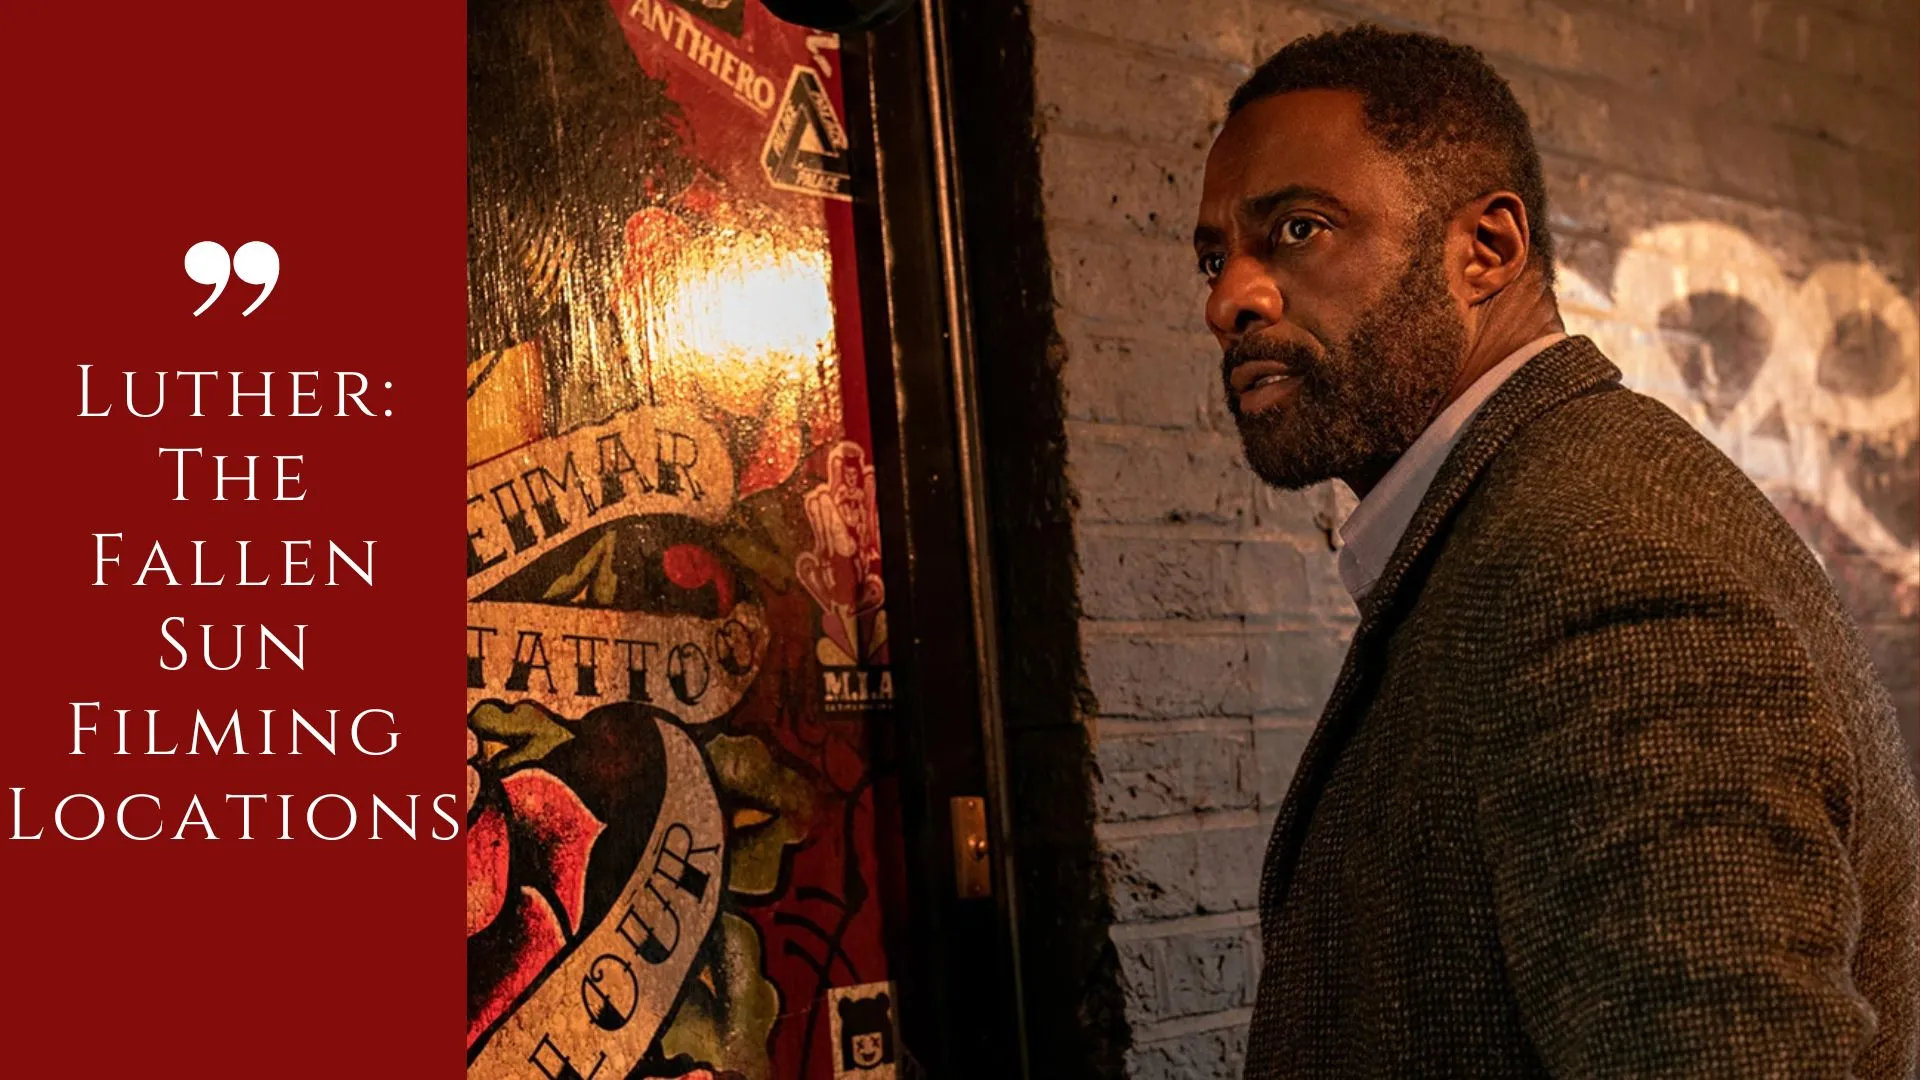 Luther: The Fallen Sun Filming Locations (Image credit: hollywoodreporter)